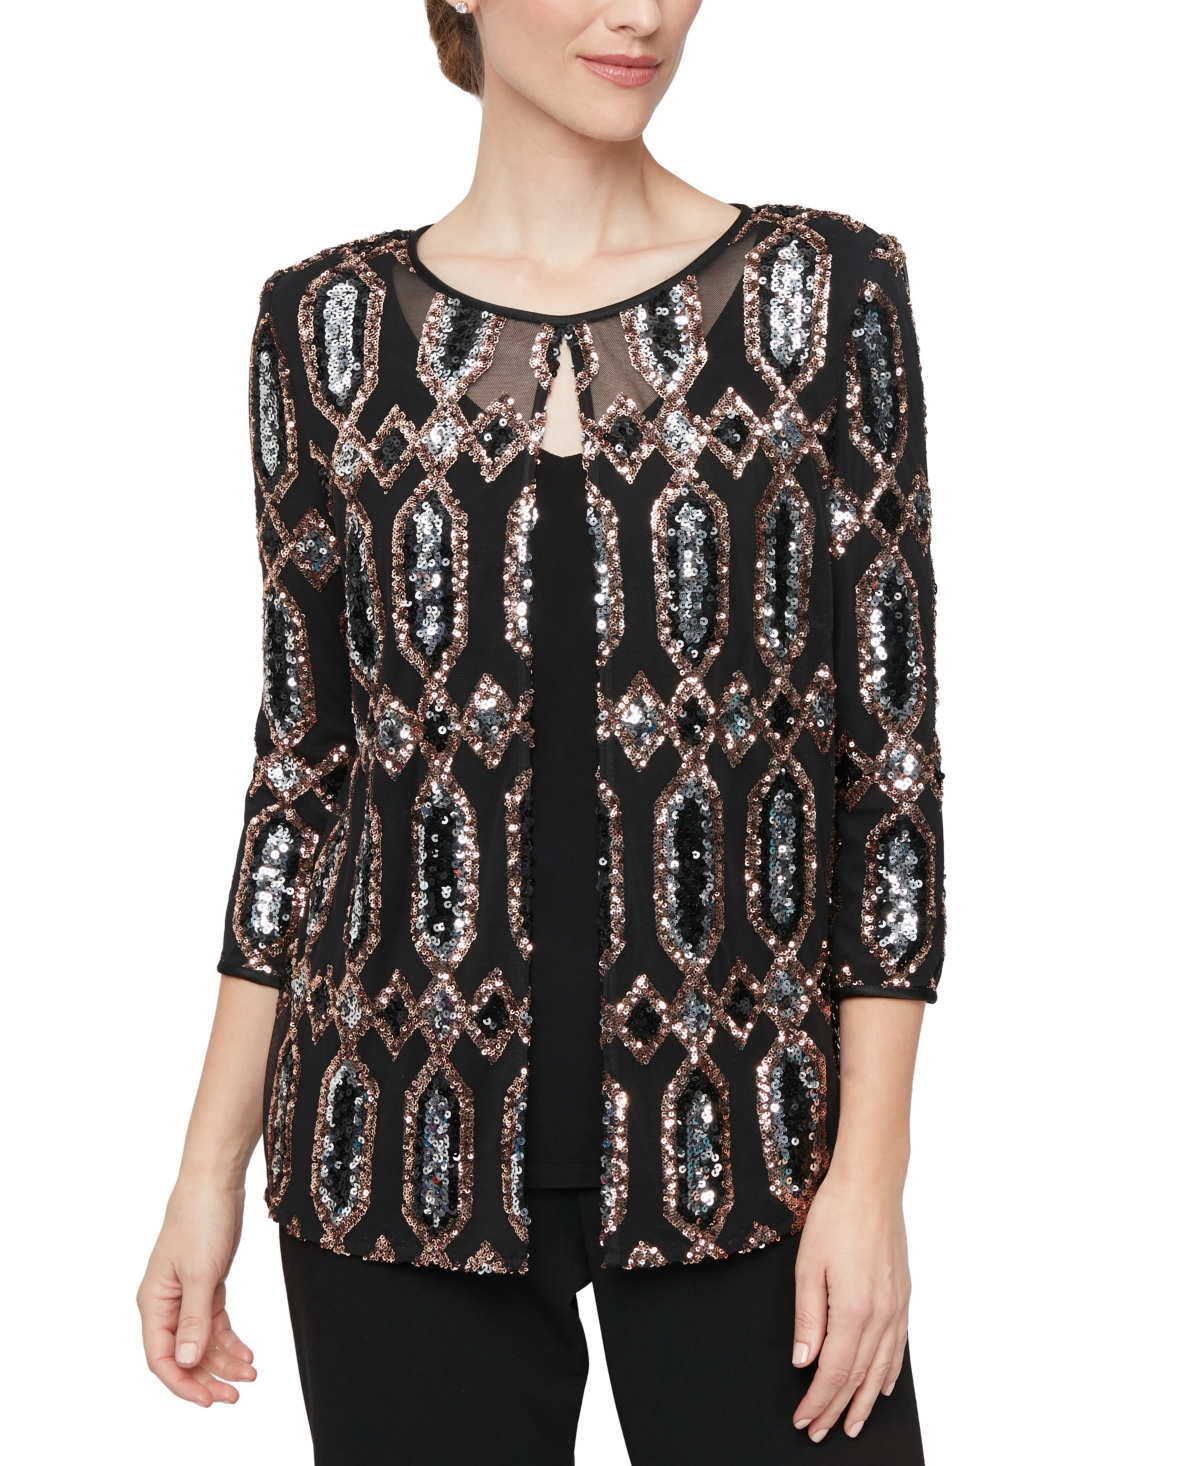  Alex Evenings Women's Layered-Look Embellished Top